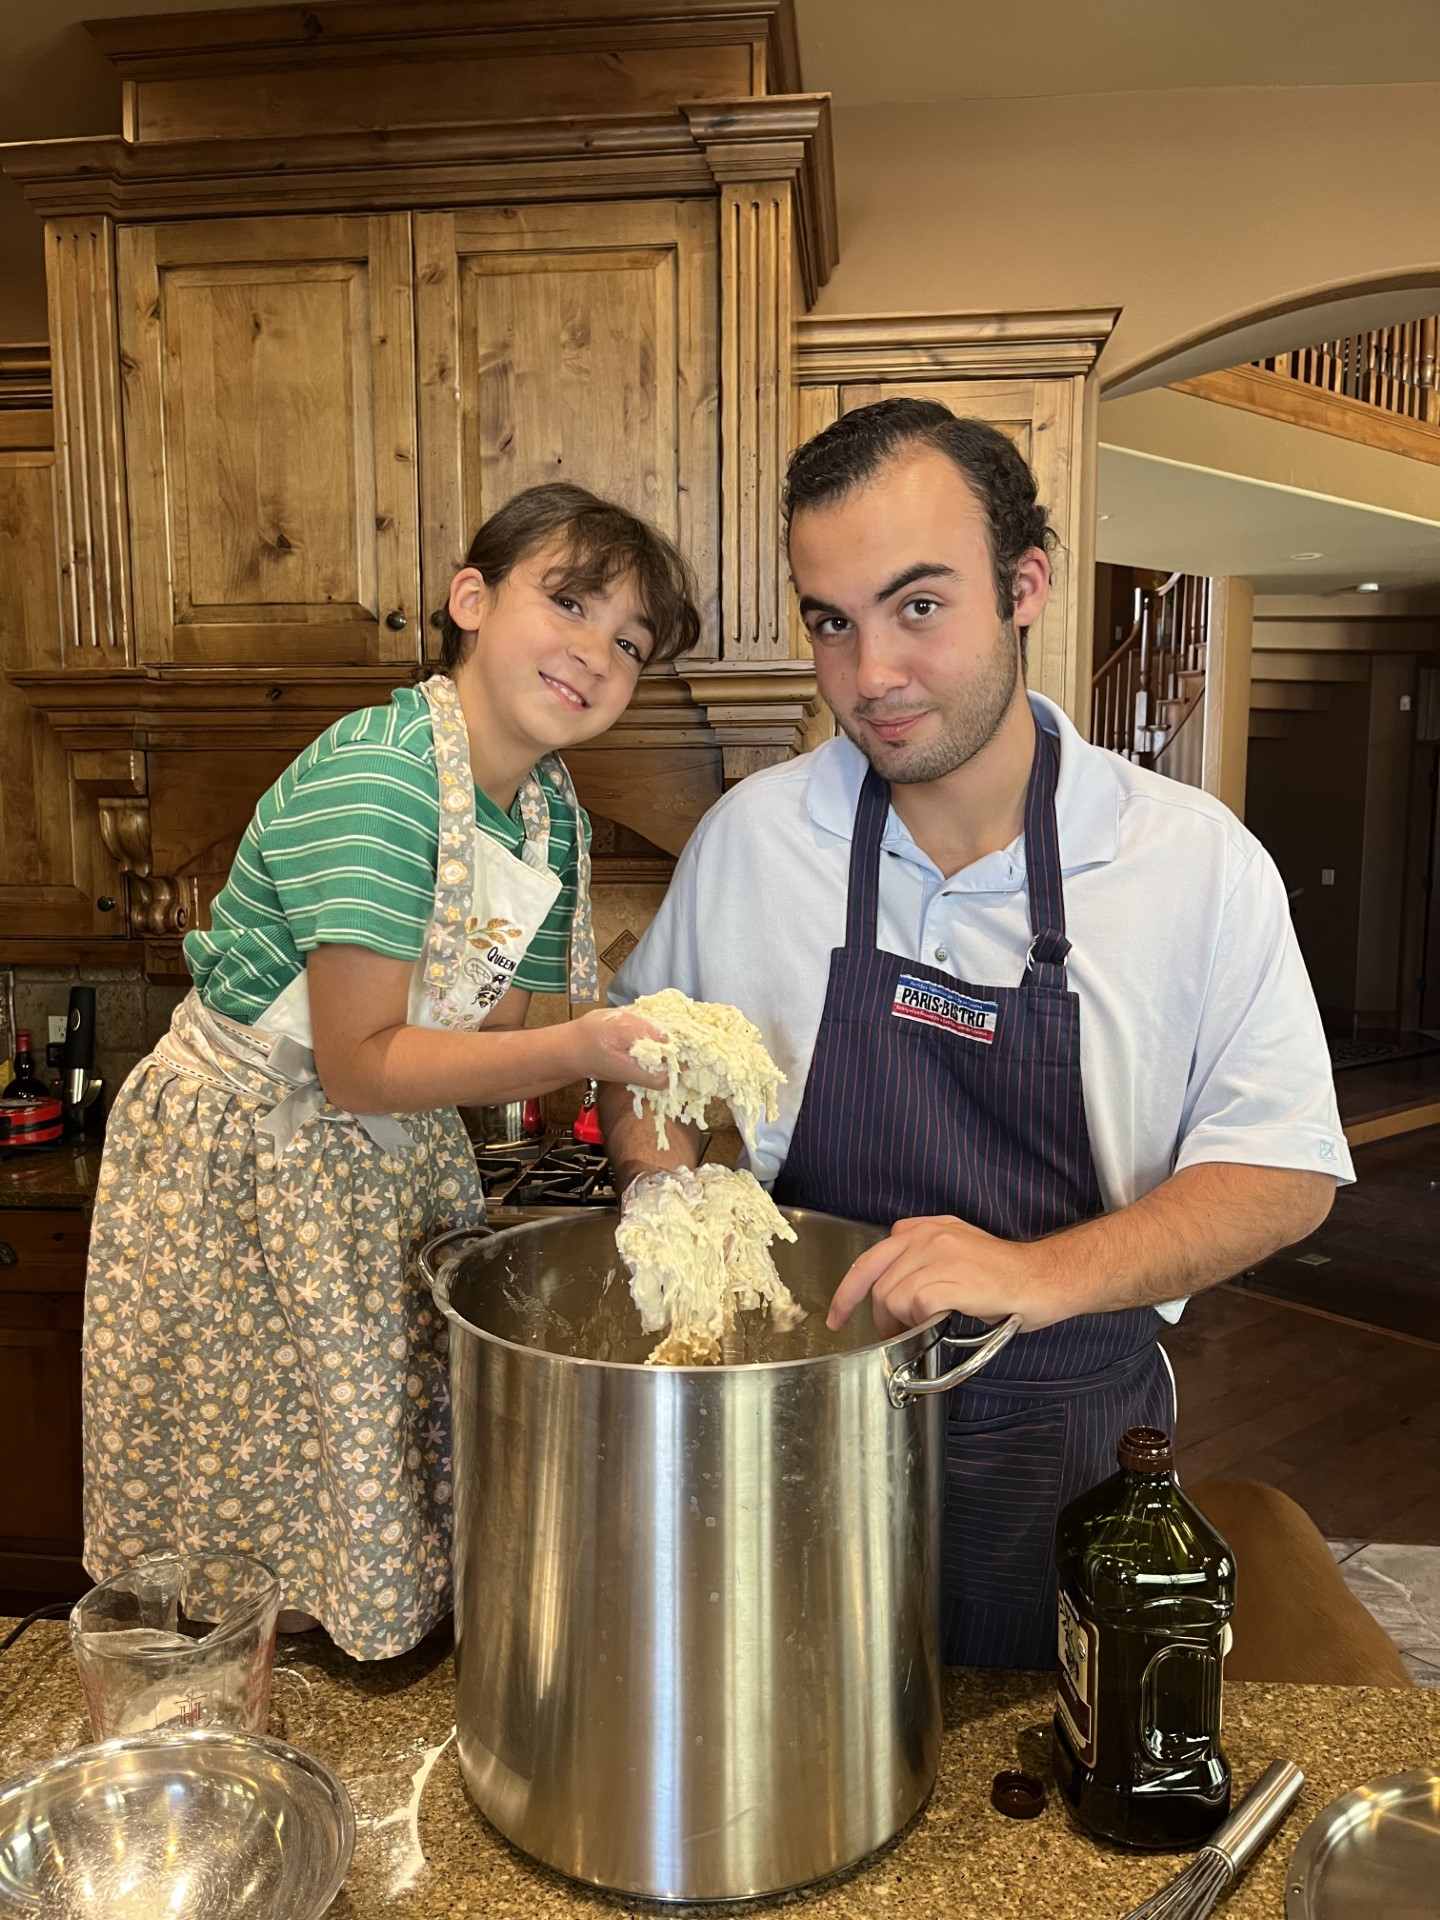 Panagiotis Saliaris shared the joy of cooking and baking with the younger generations.